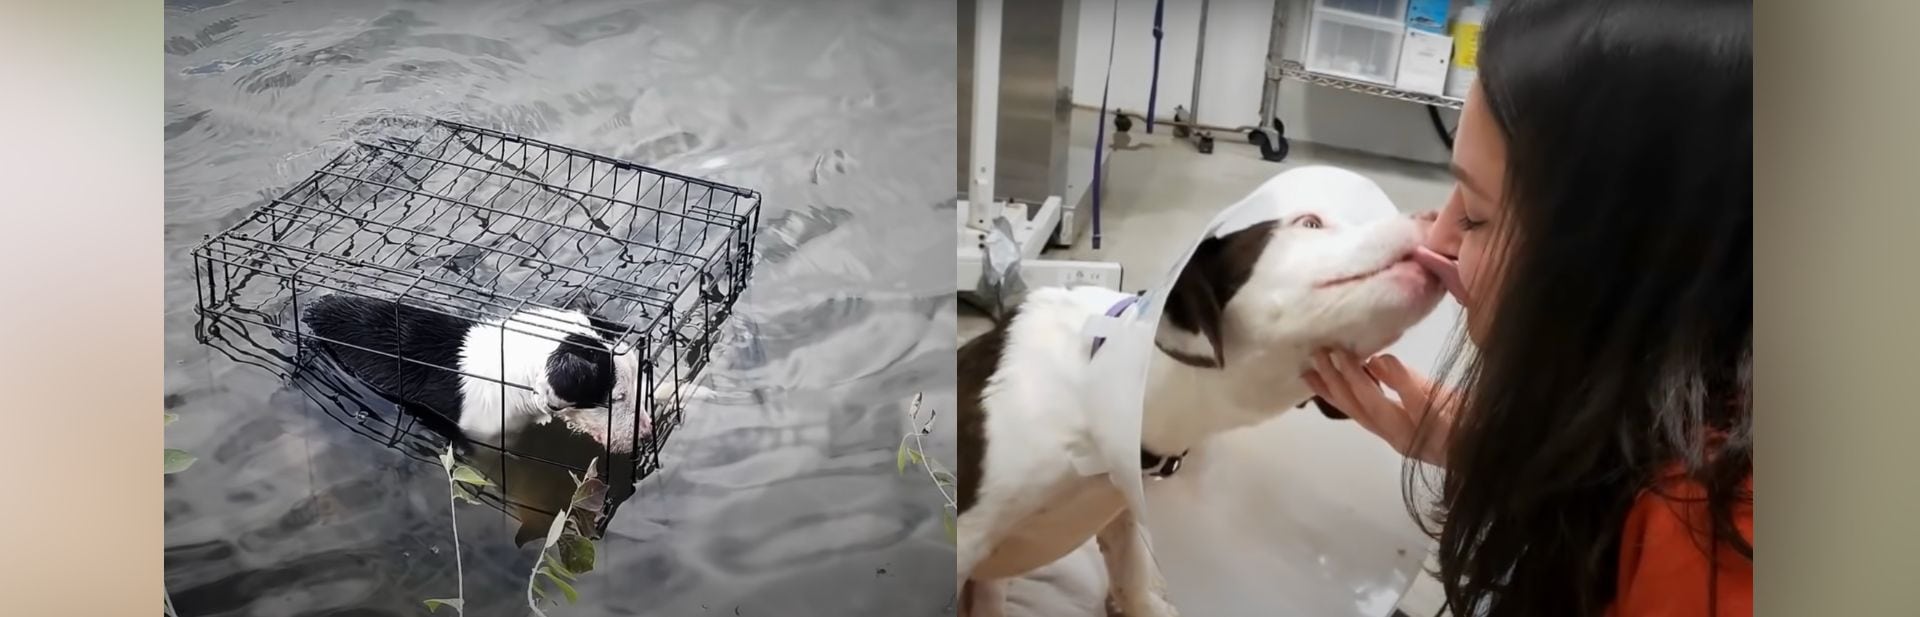 Caged Puppy Floating Helplessly in Icy Waters Braces For Life Until a Fisherman Spots Her